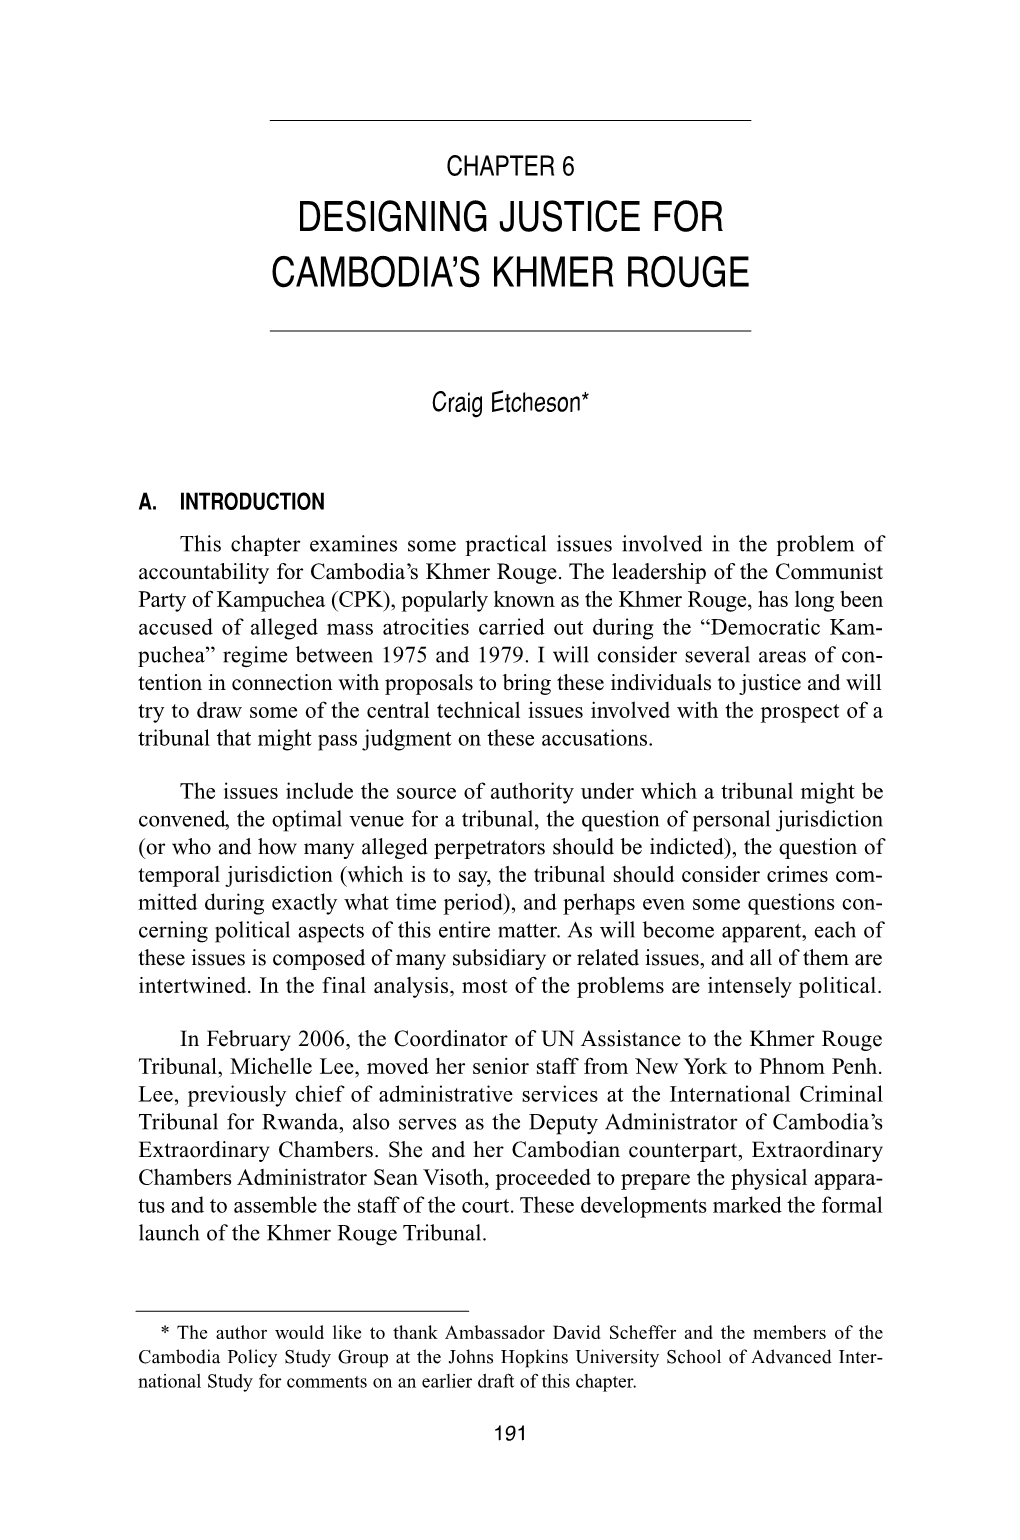 Designing Justice for Cambodia's Khmer Rouge